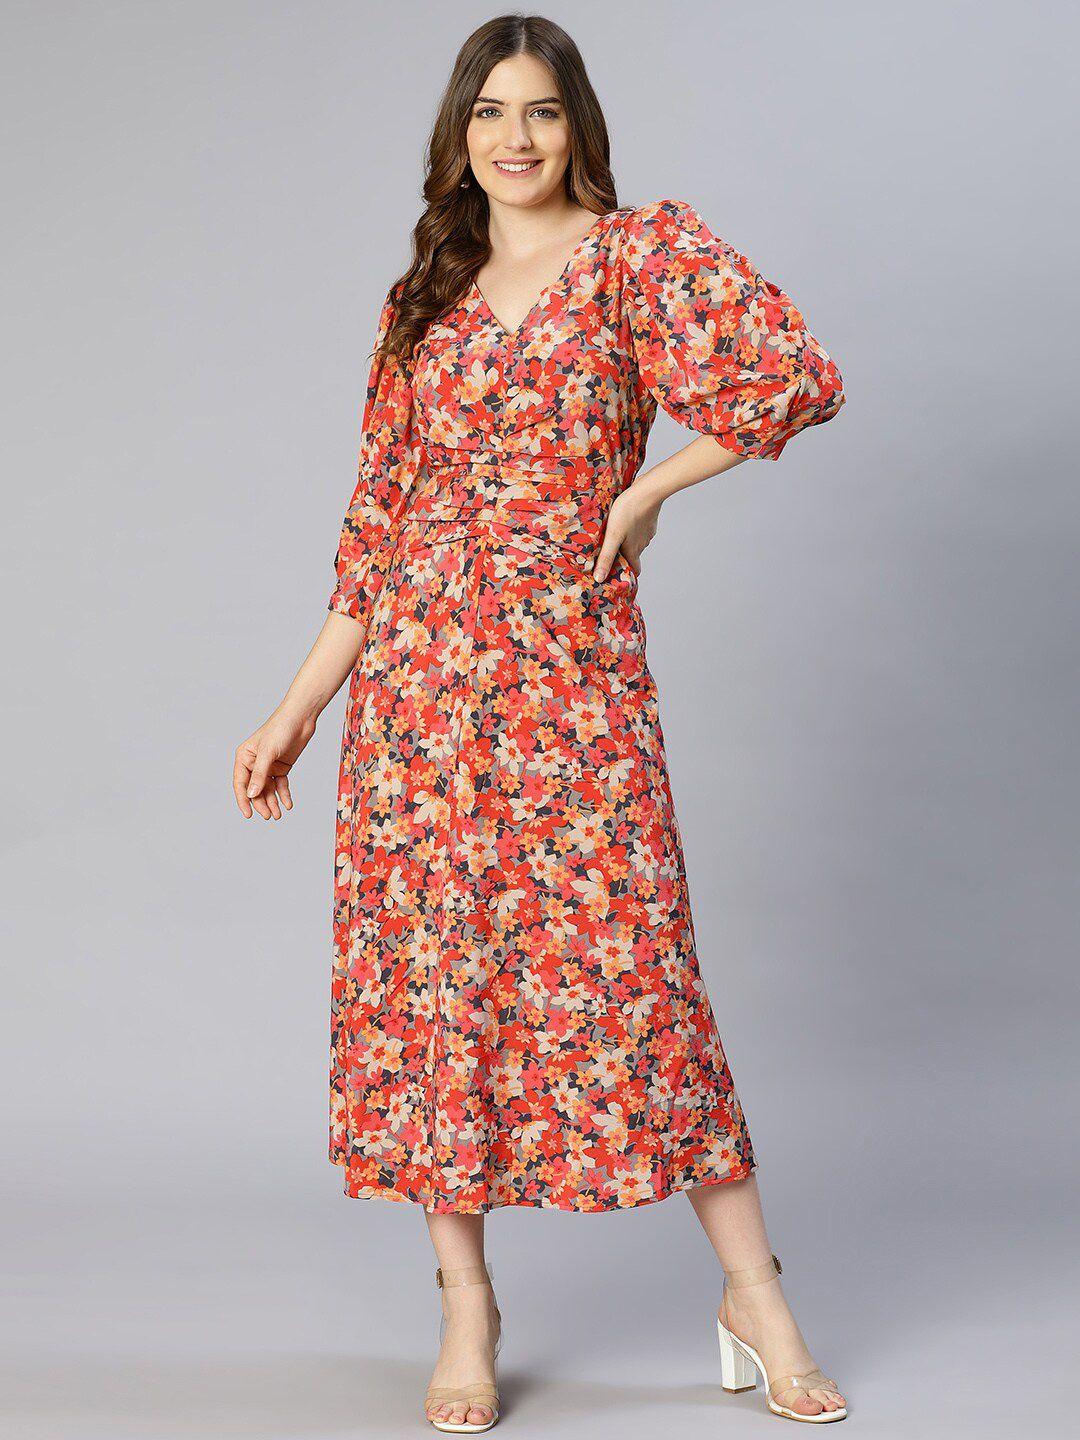 oxolloxo red & cream floral satin pleated puff sleeves a-line midi dress